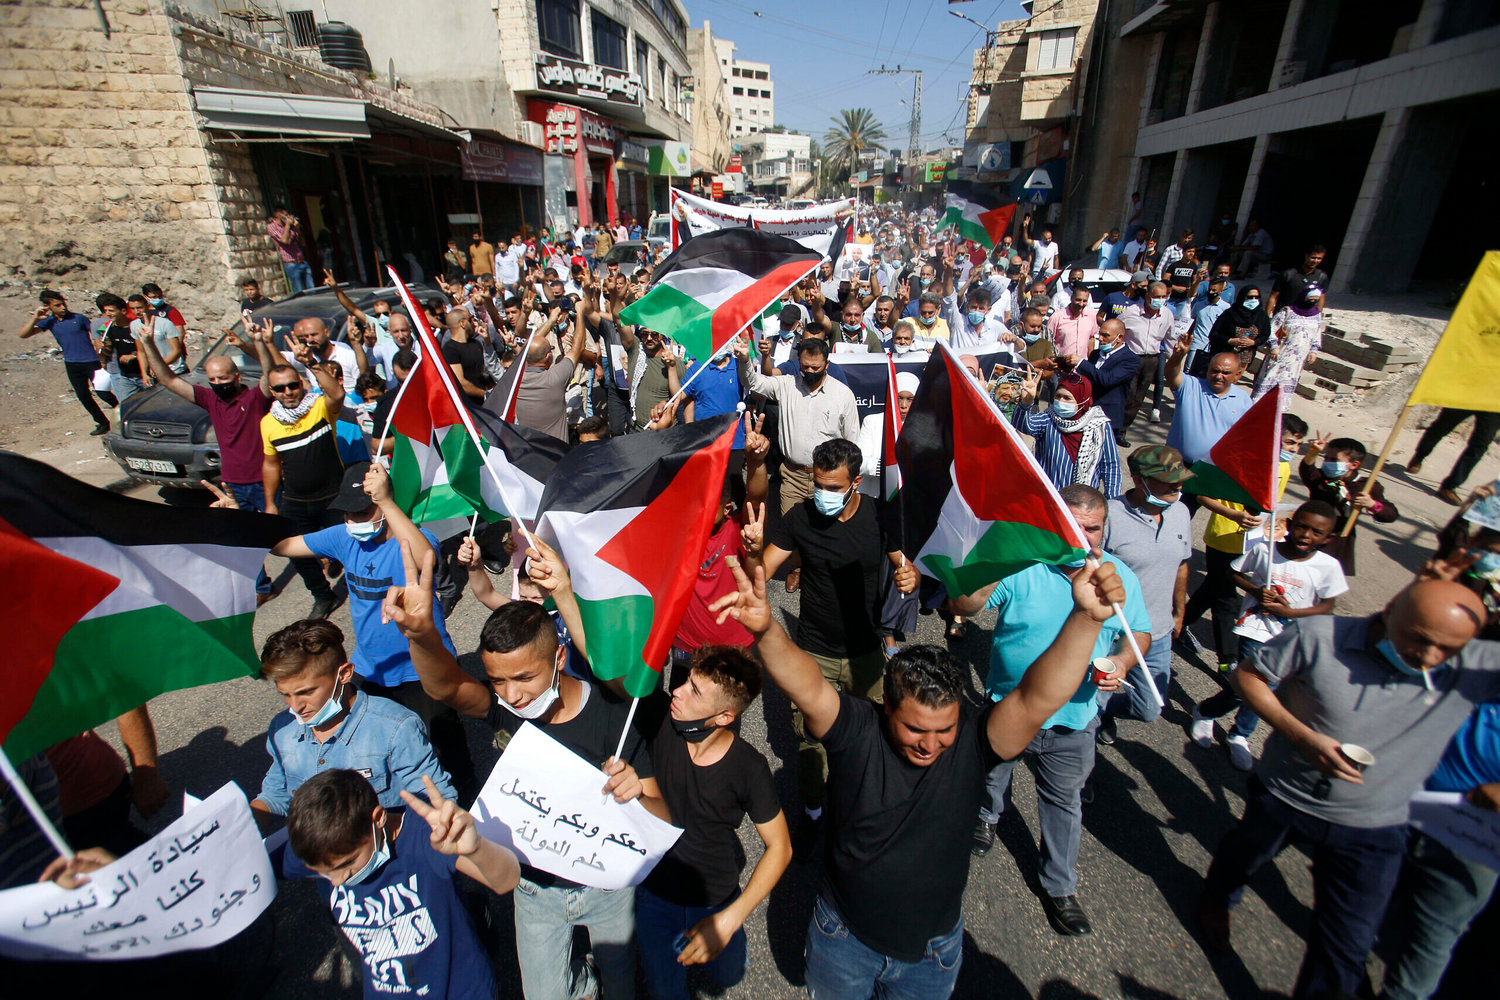 Palestinians hold flags during a rally in support of Palestinian President Mahmoud Abbas in the West Bank town of Tubas on Sept. 27.